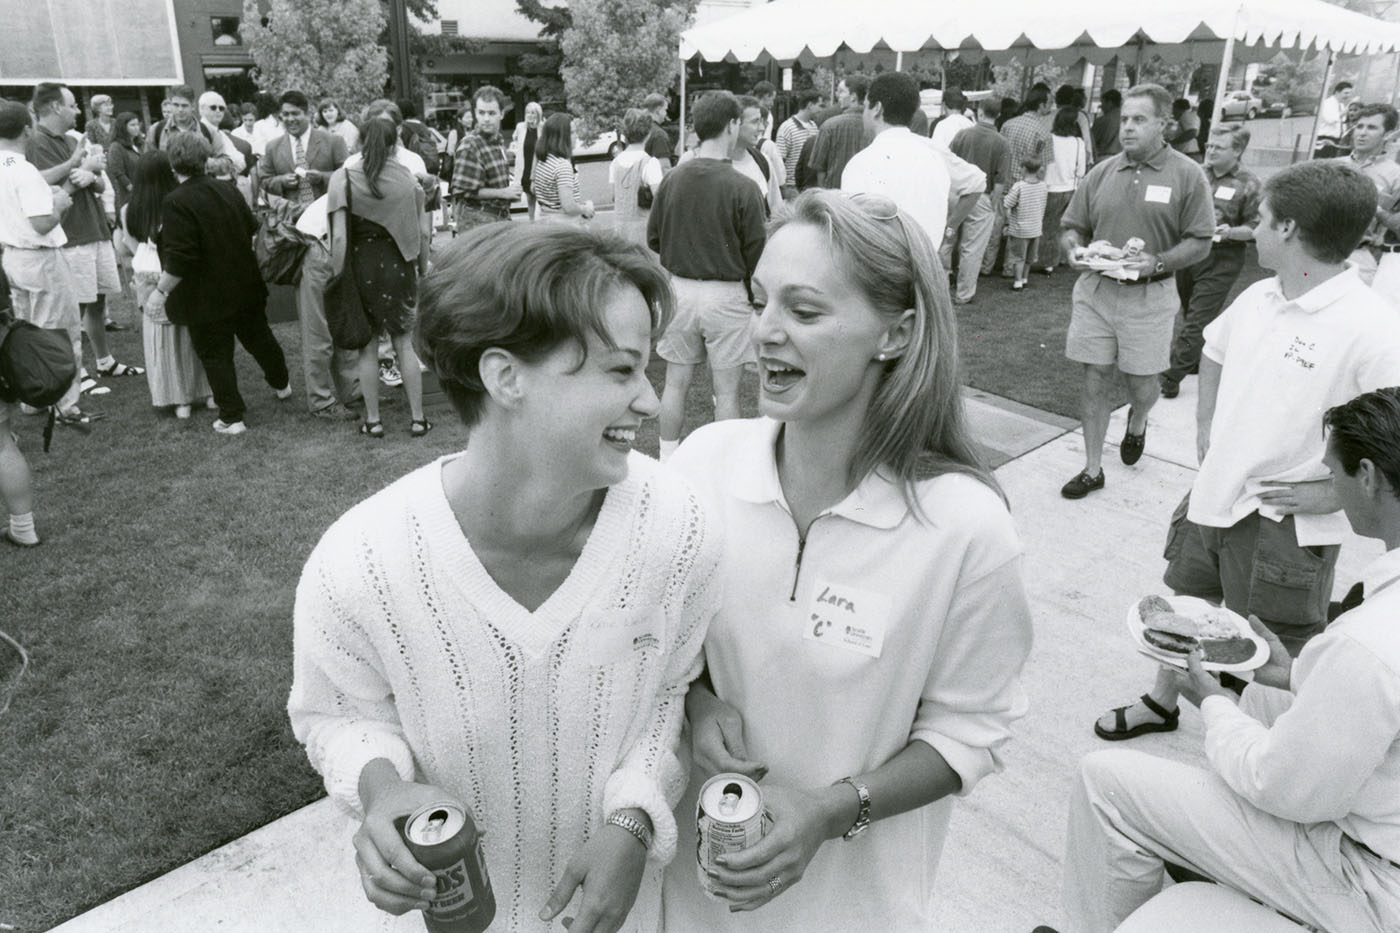 Students gathered outside for an Entering Student Picnic event (1997)